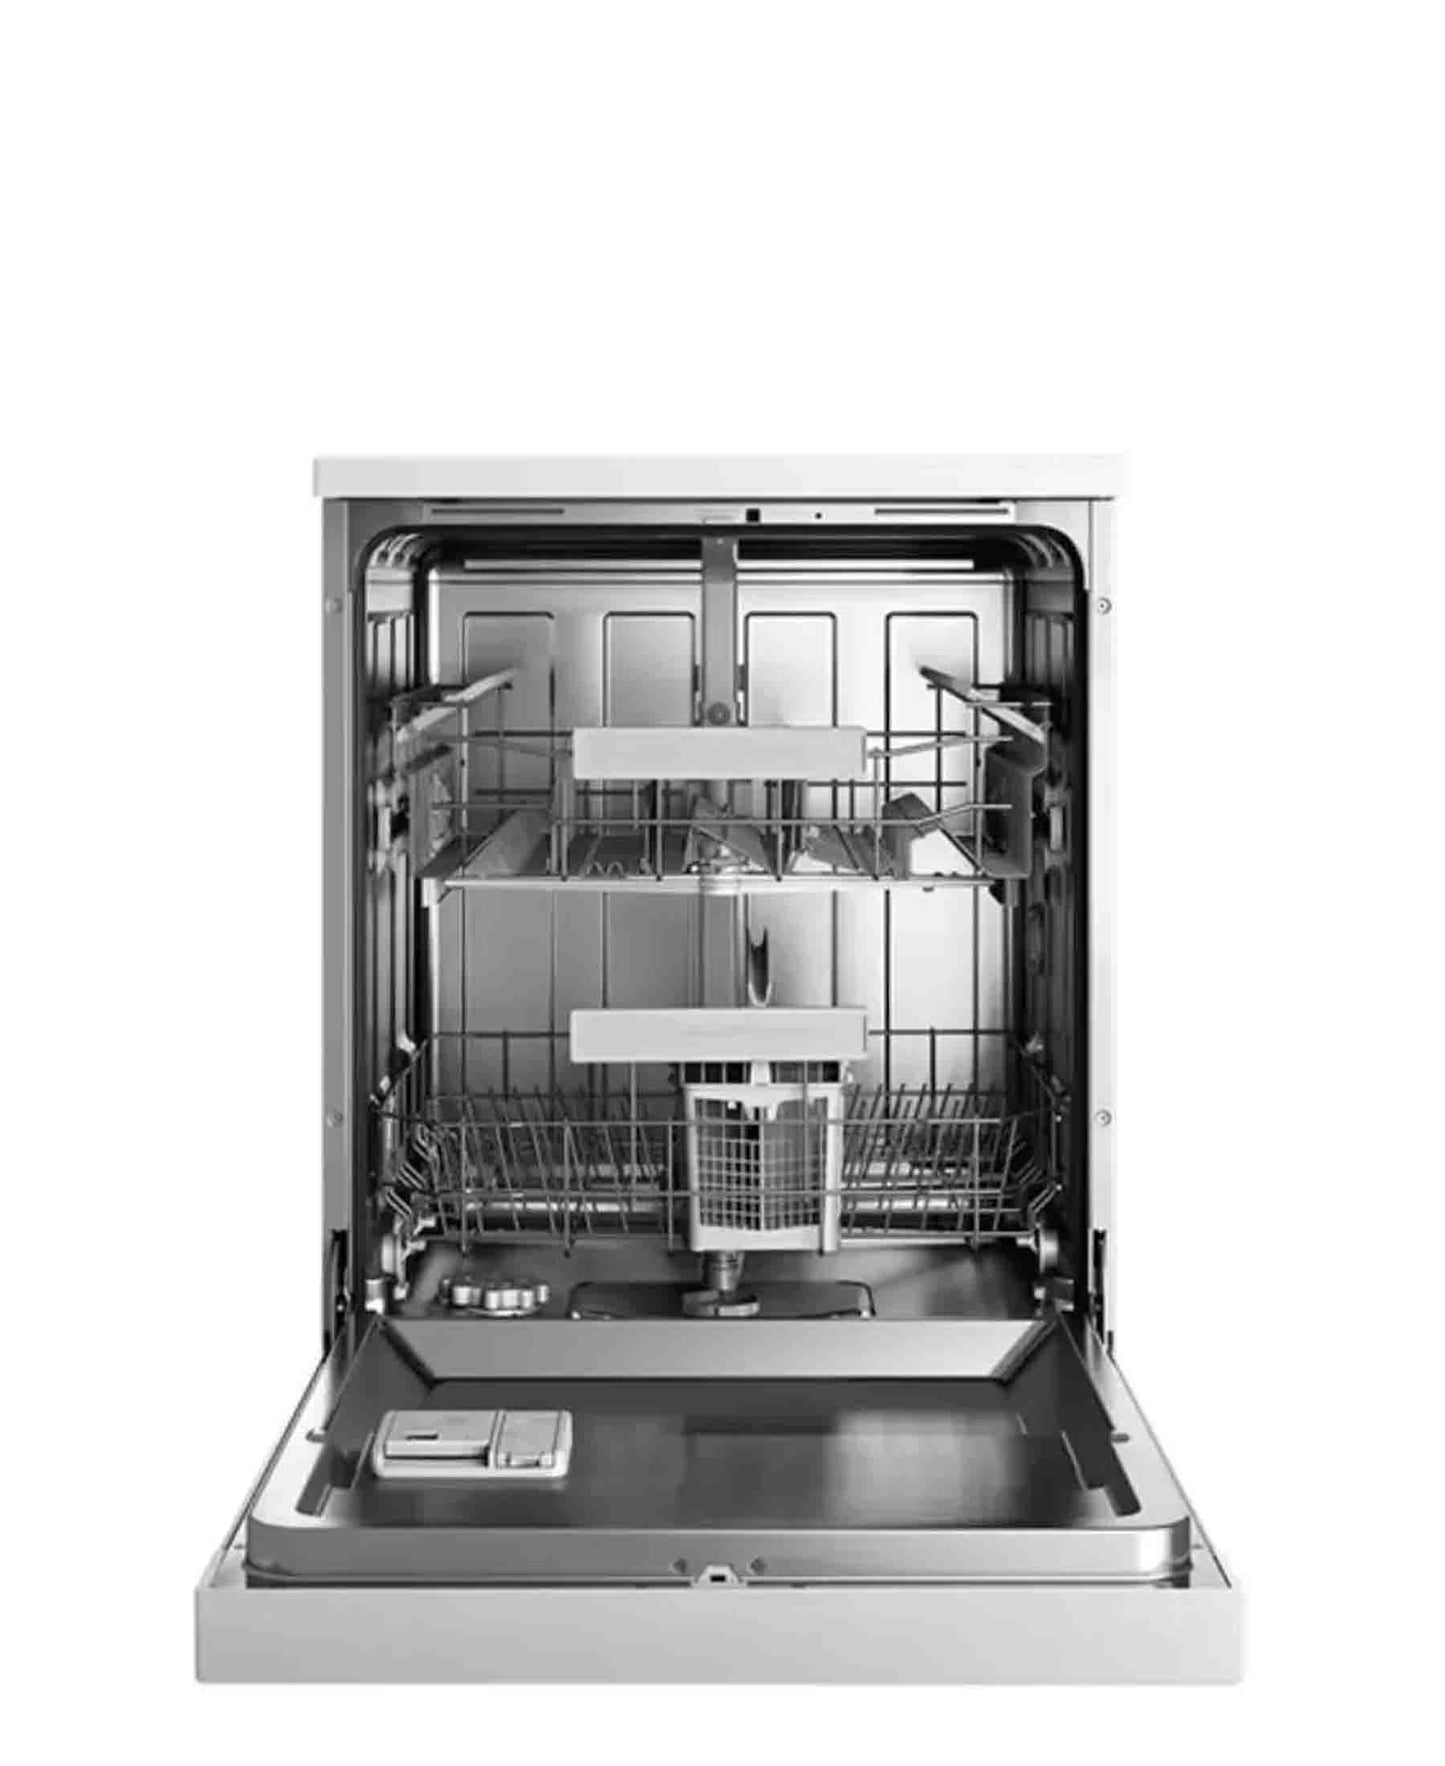 AEG 60cm 5000 Series Freestanding Dishwasher With 15 Place Settings - Stainless Steel